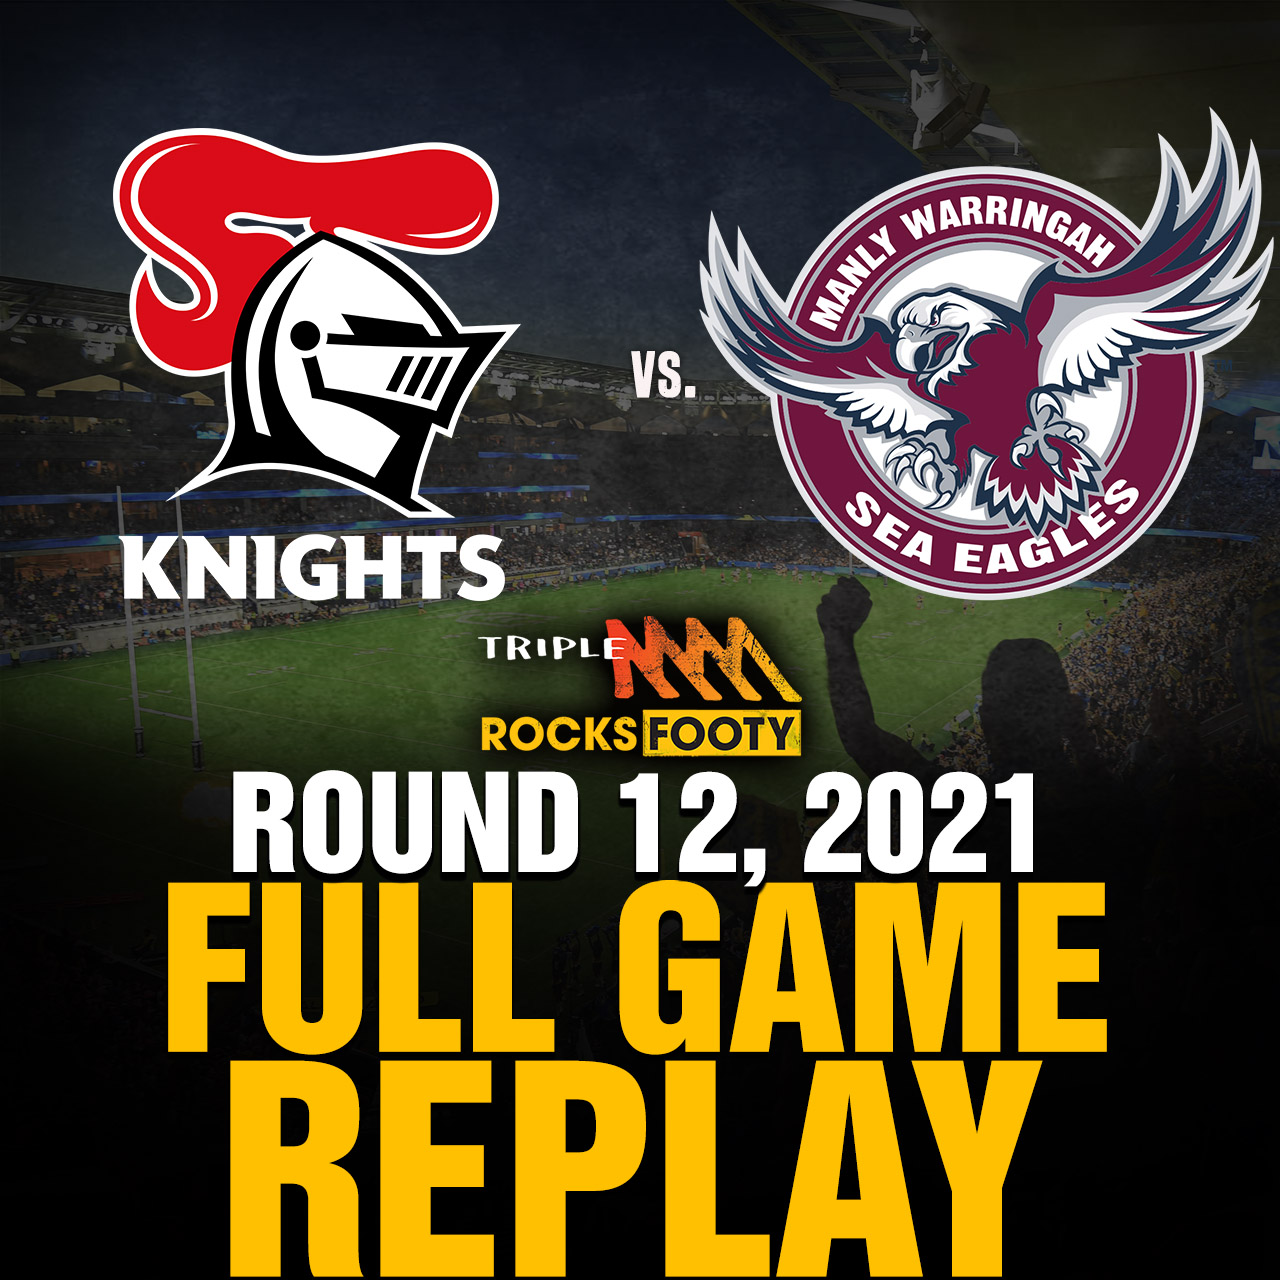 FULL GAME REPLAY | Newcastle Knights vs. Manly Sea Eagles